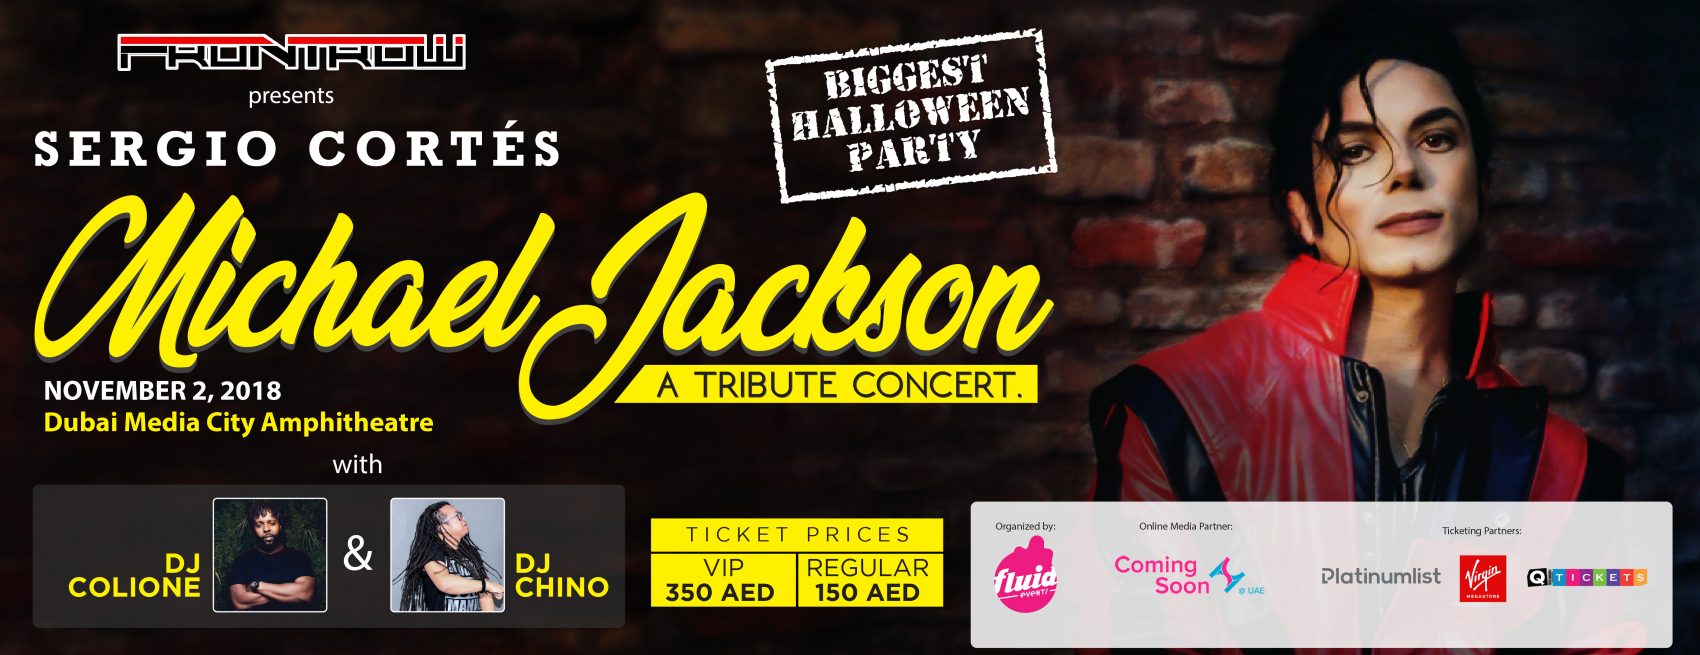 Michael Jackson: A Tribute Concert by Sergio Cortés - Coming Soon in UAE